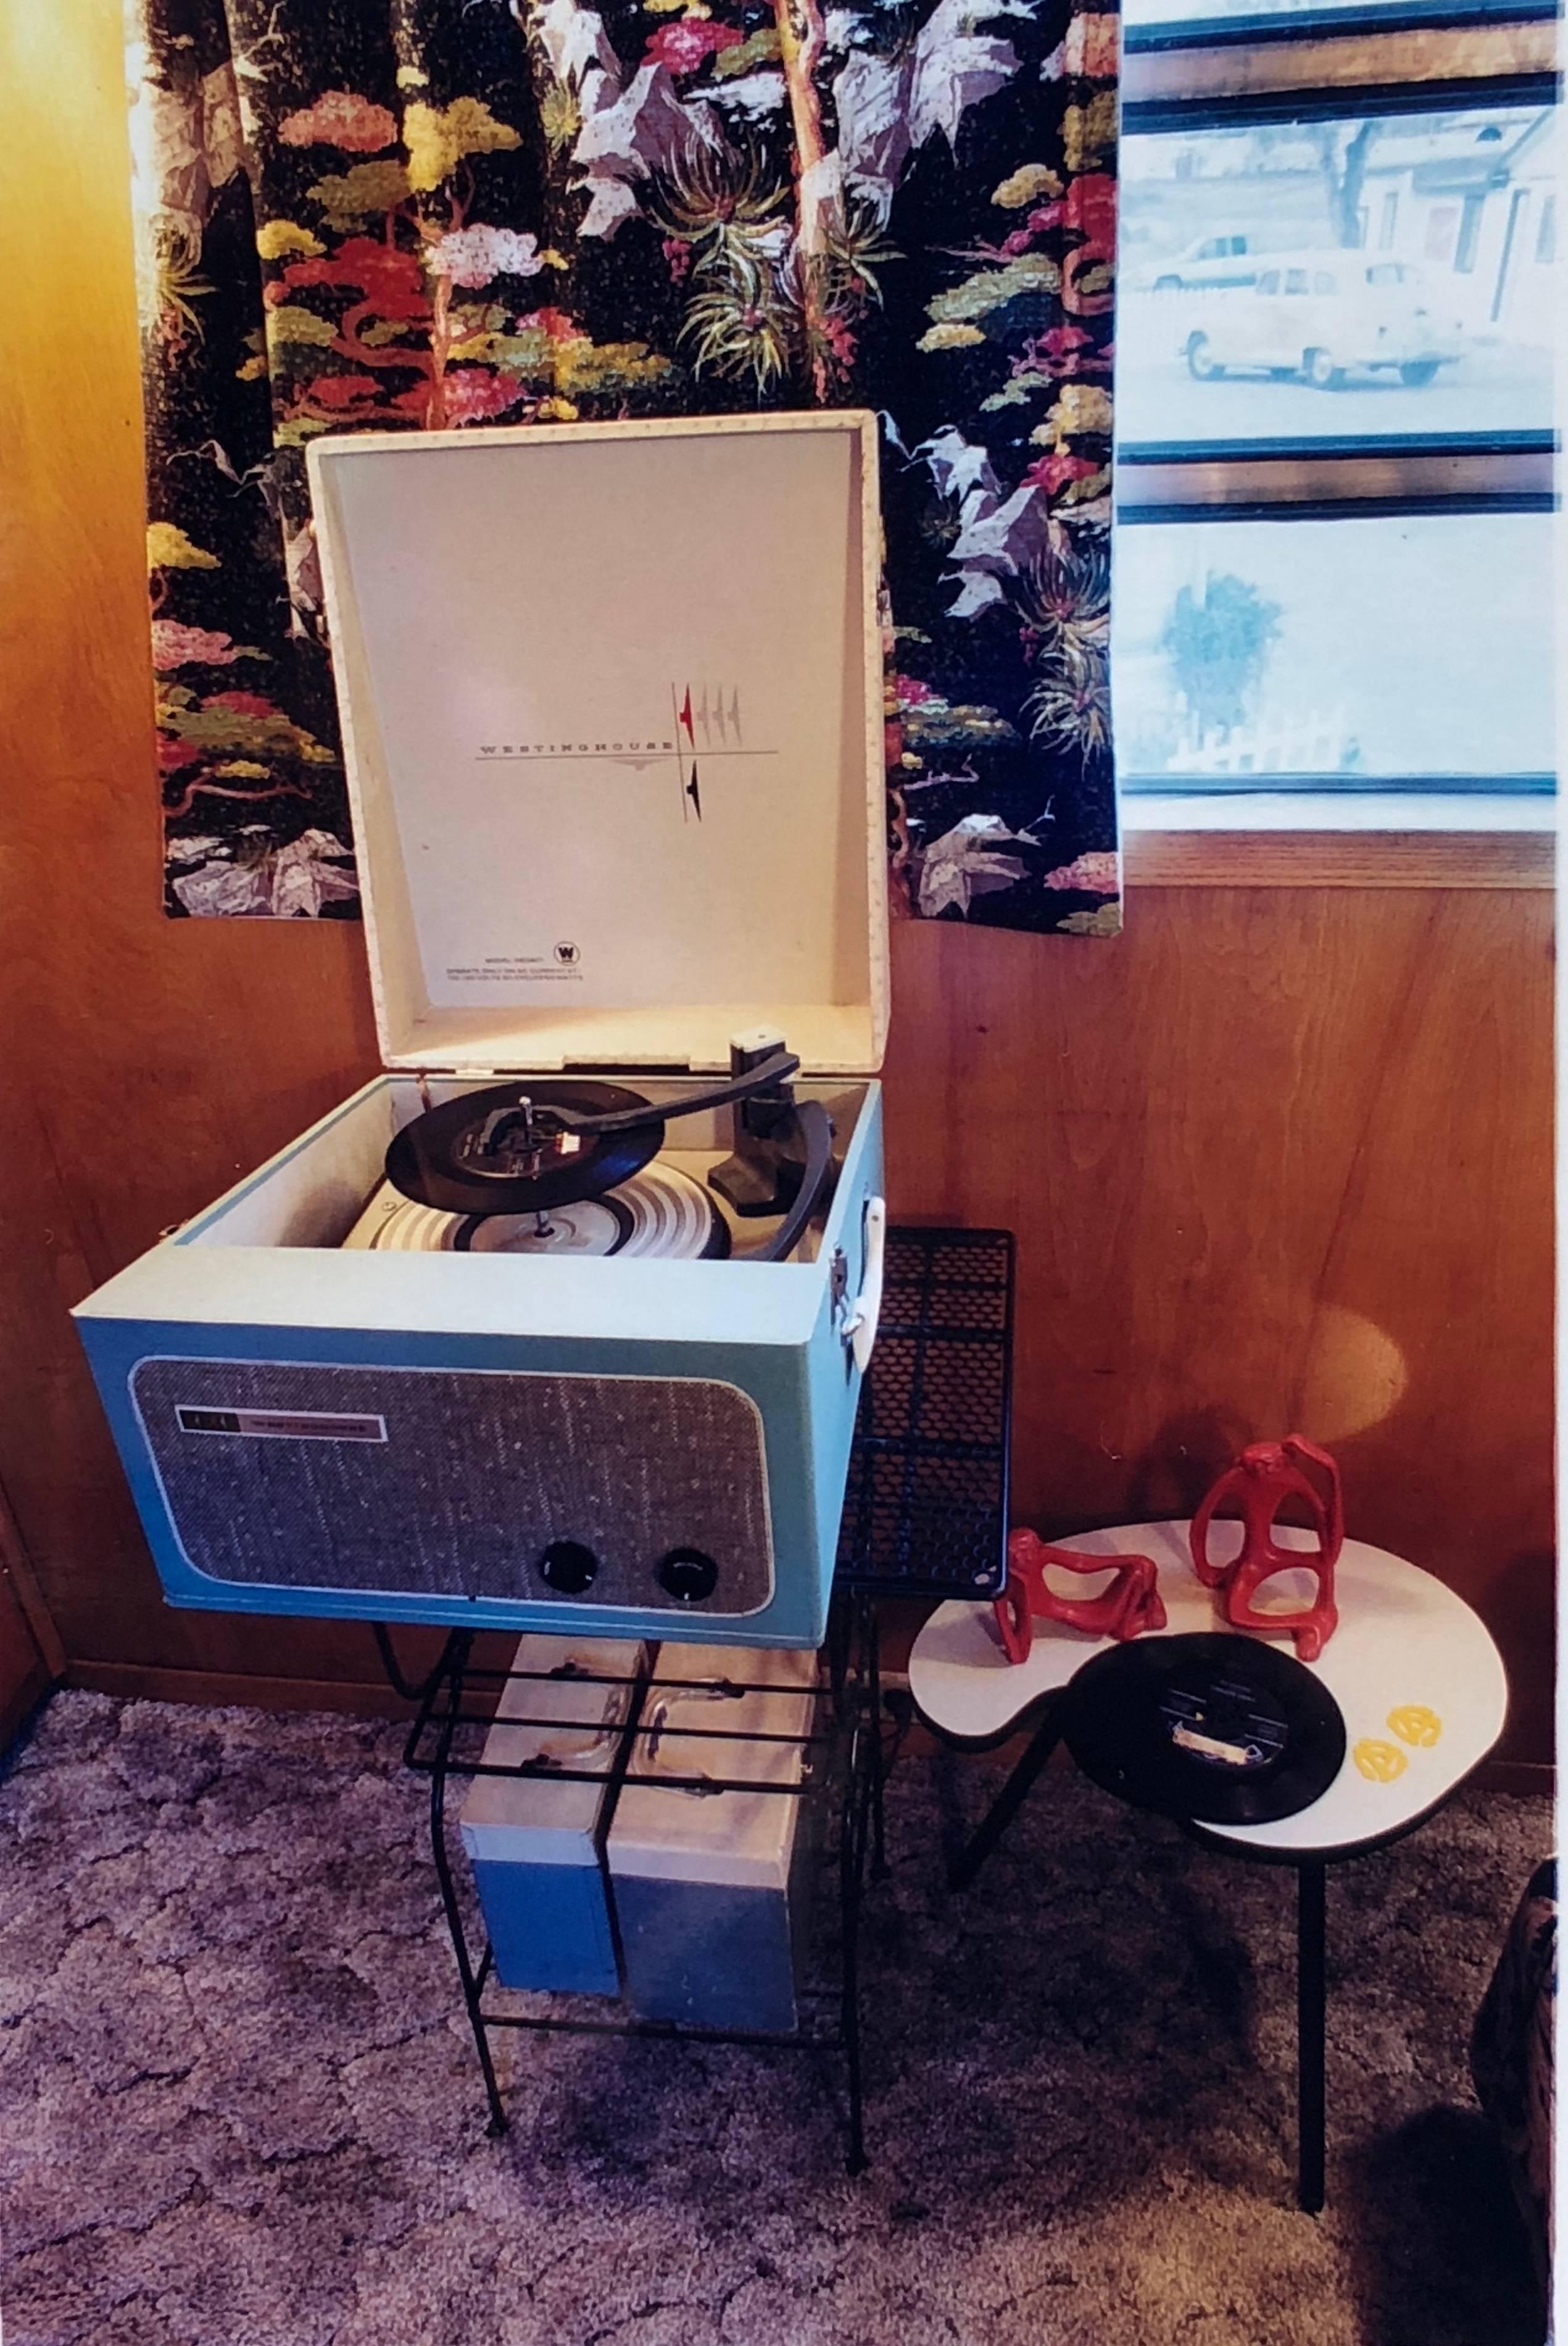 Westinghouse Record Player, Shady Dell Trailer Park, Bisbee, Arizona